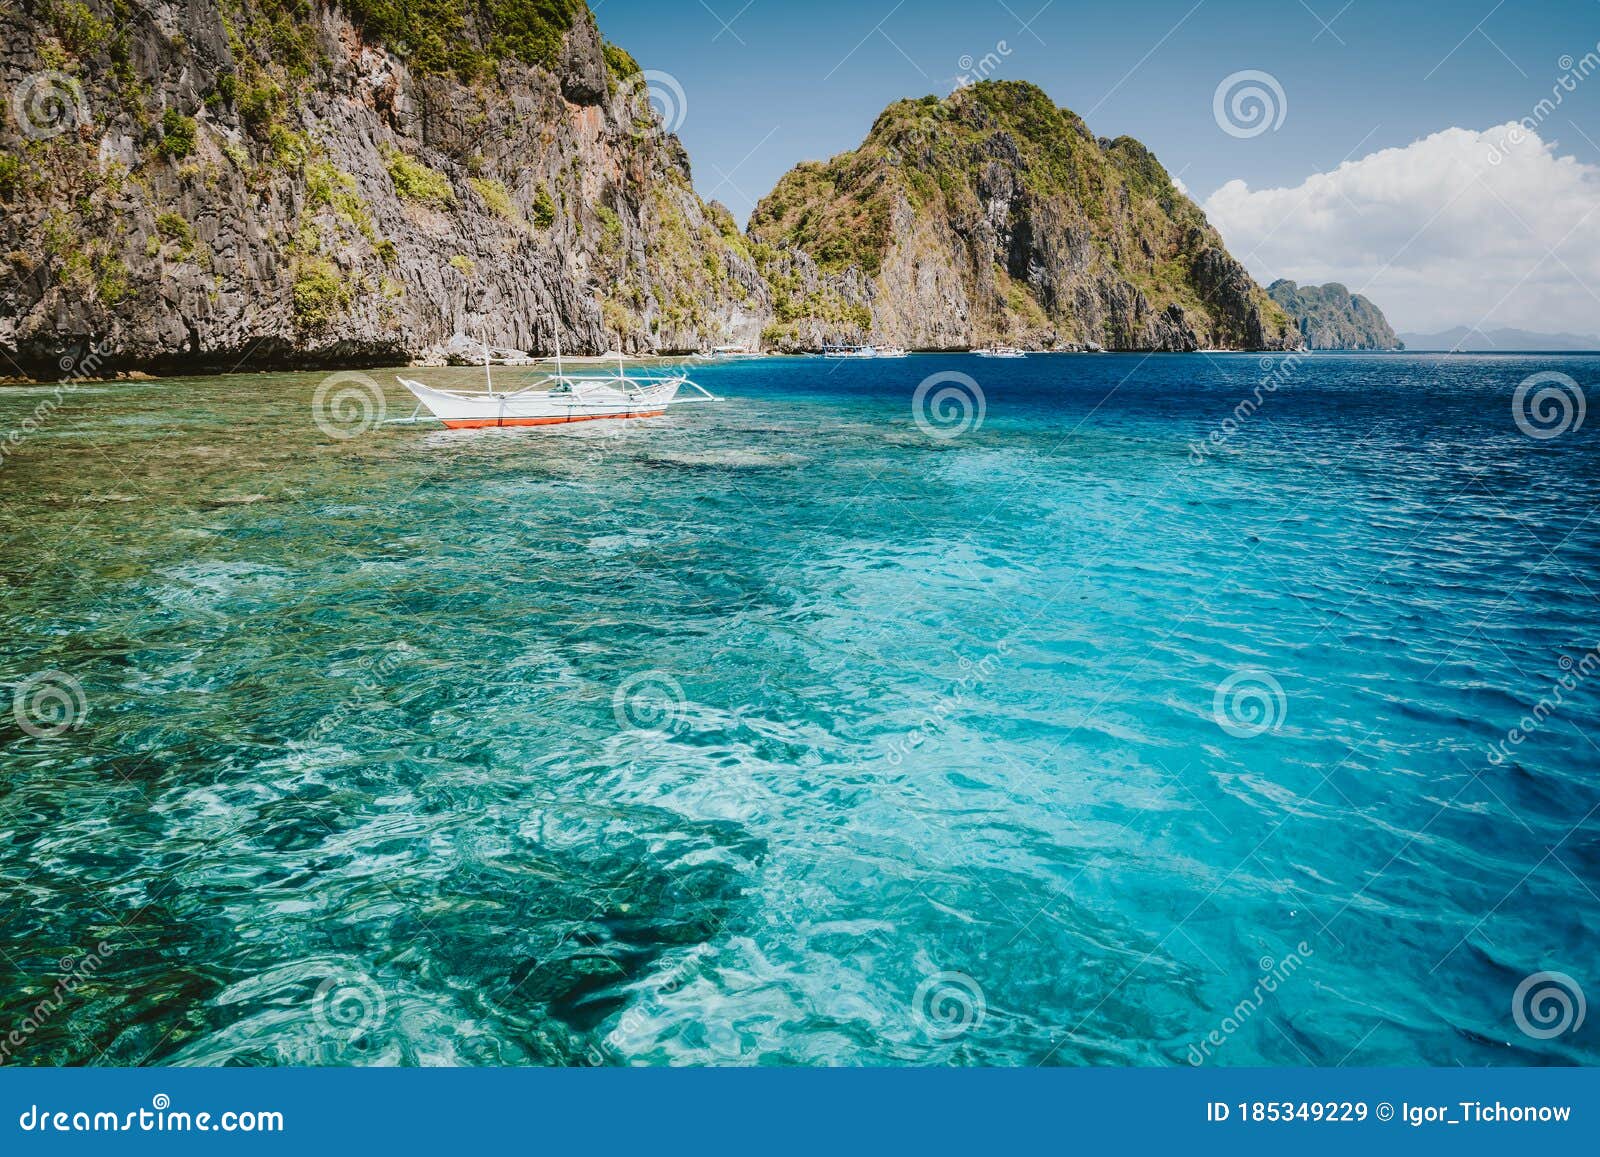 Nido, Palawan, Philippines. Banca Boat in Crystal Clear Ocean Water Near Matinloc Island, Highlights of Hopping Trip on C Stock Image - Image of hopping, holiday: 185349229